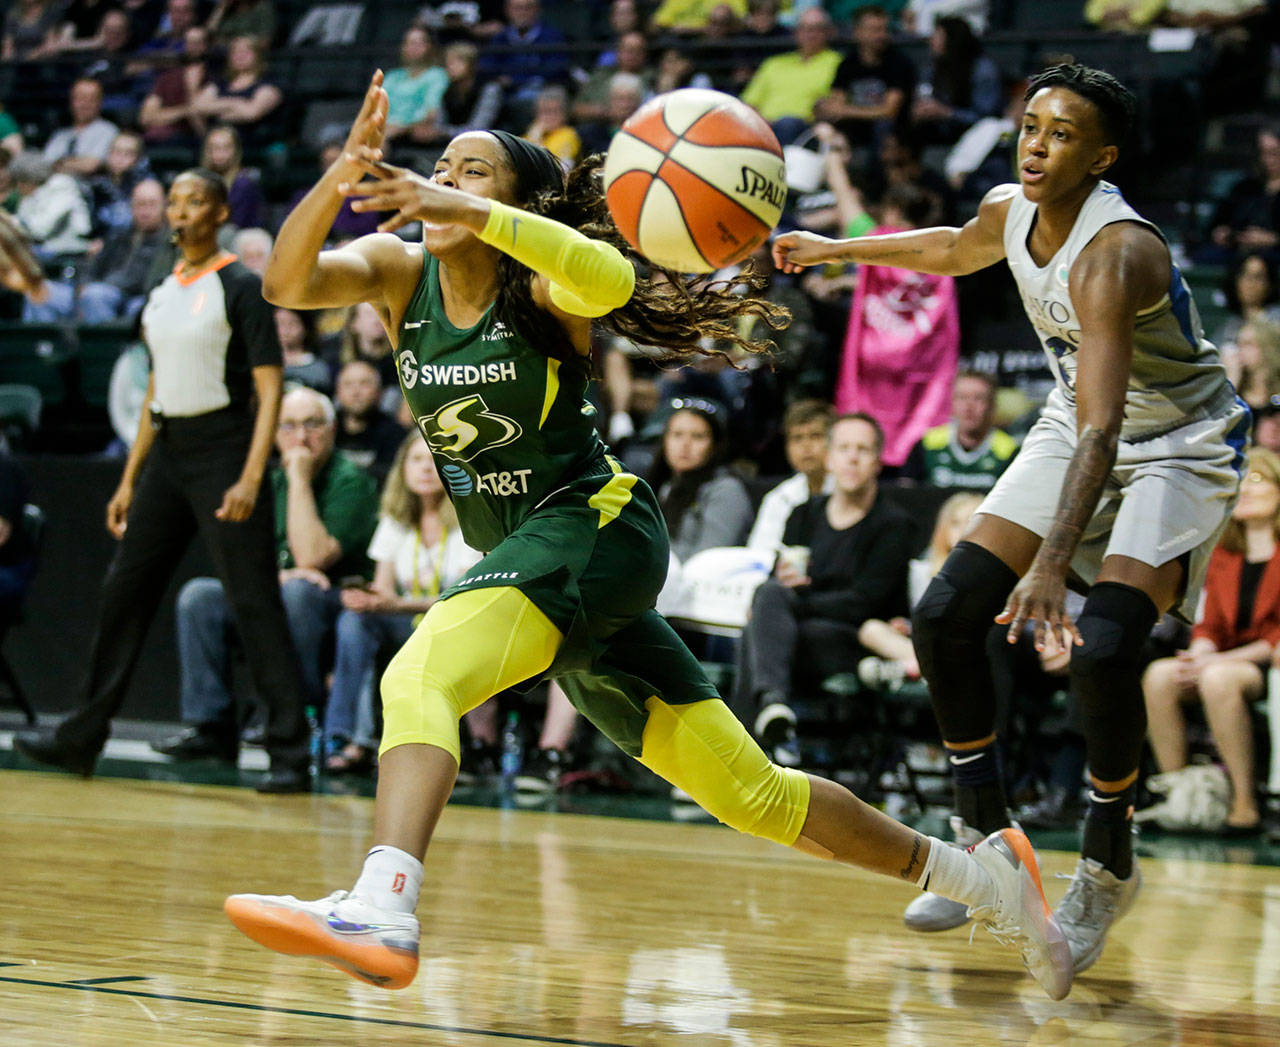 The Storm’s Jordin Canada loses the ball as she drives to the net during a game against the Lynx on June 4 at the Angel of the Winds Arena in Everett. (Andy Bronson / The Herald)